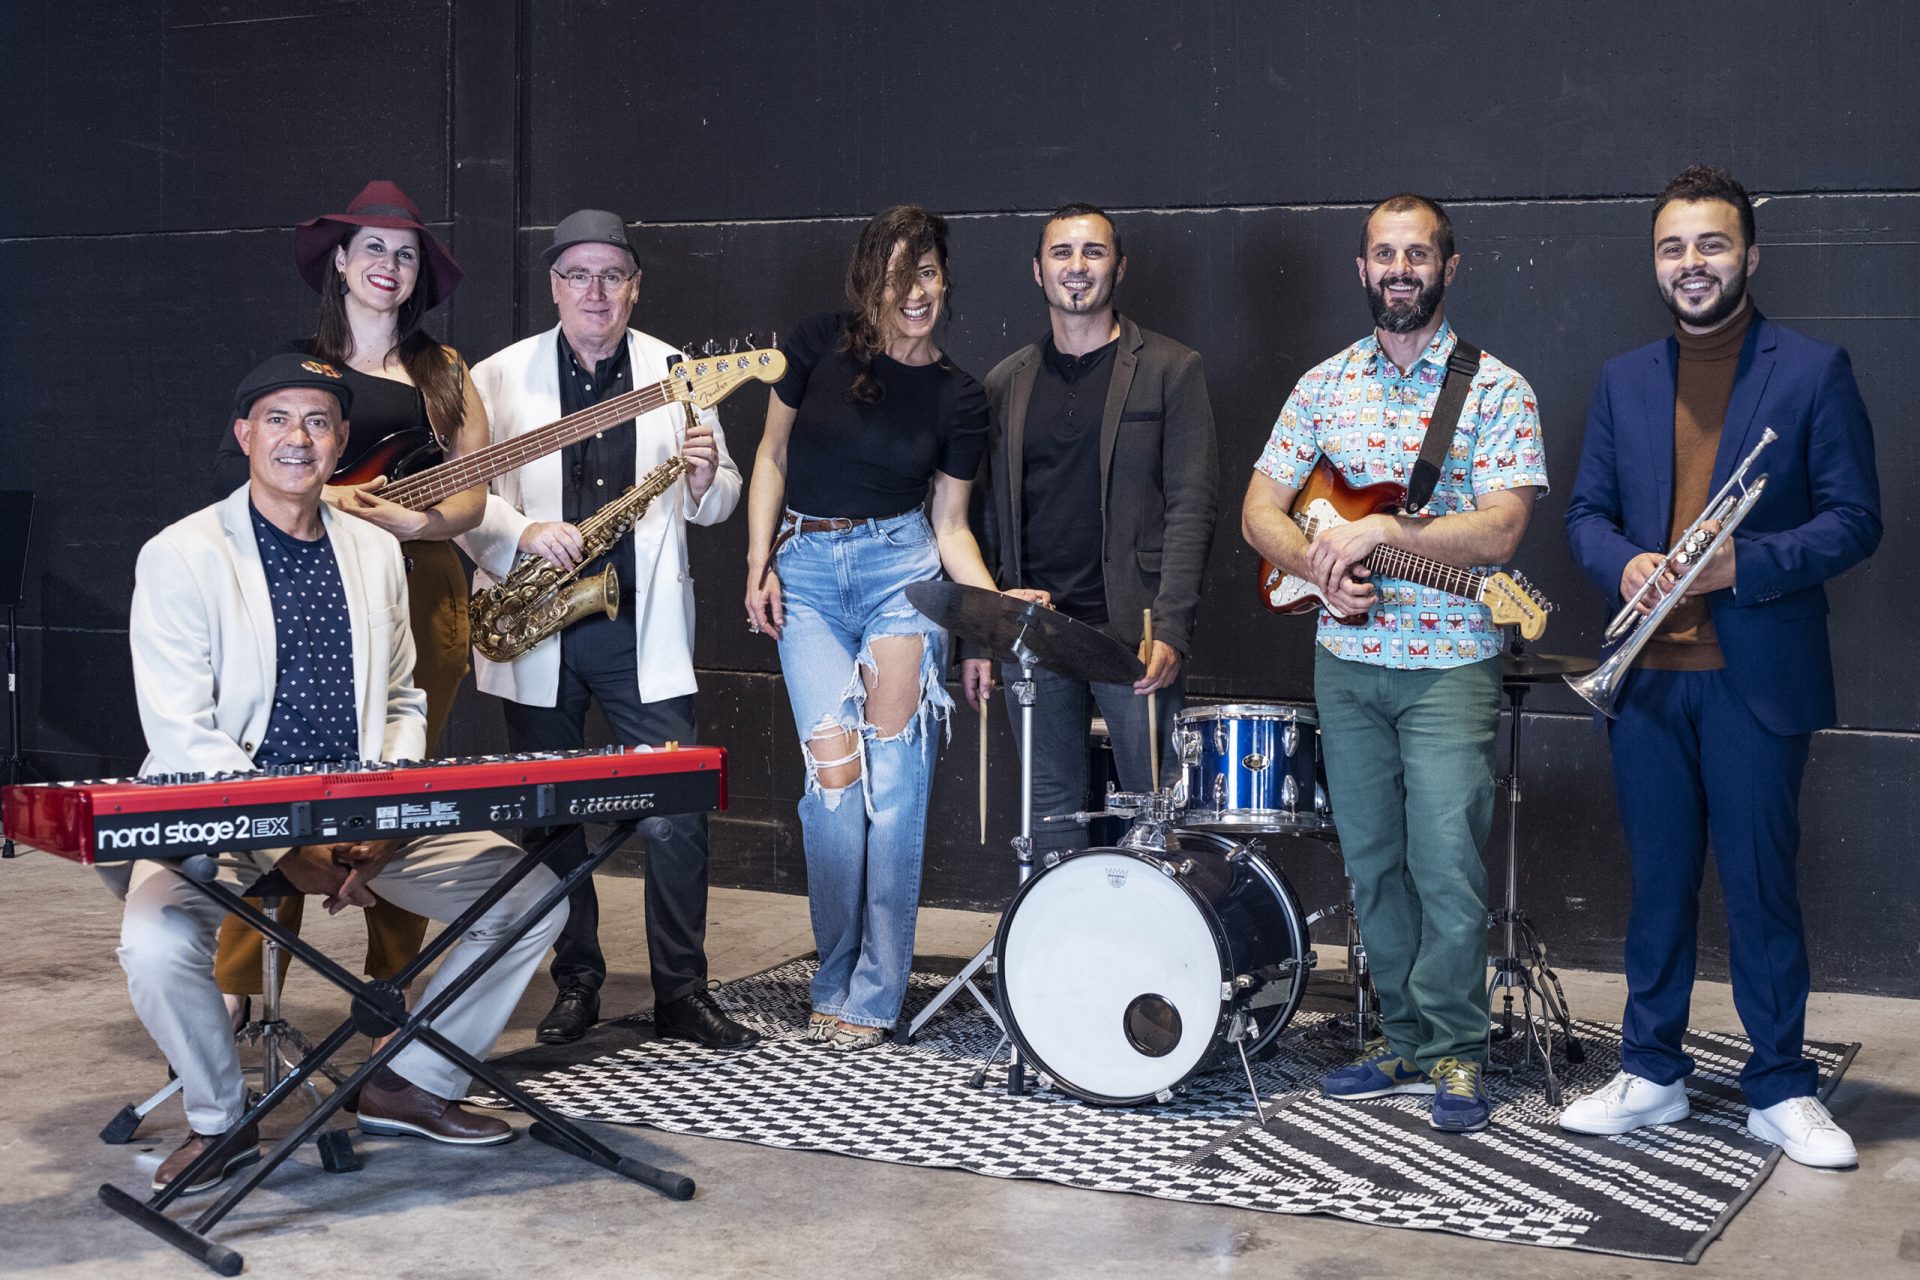 The Festival Canarias Jazz & Más bids farewell until 2022 with Miriam Fleitas & D’Local Groove at The Paper Club